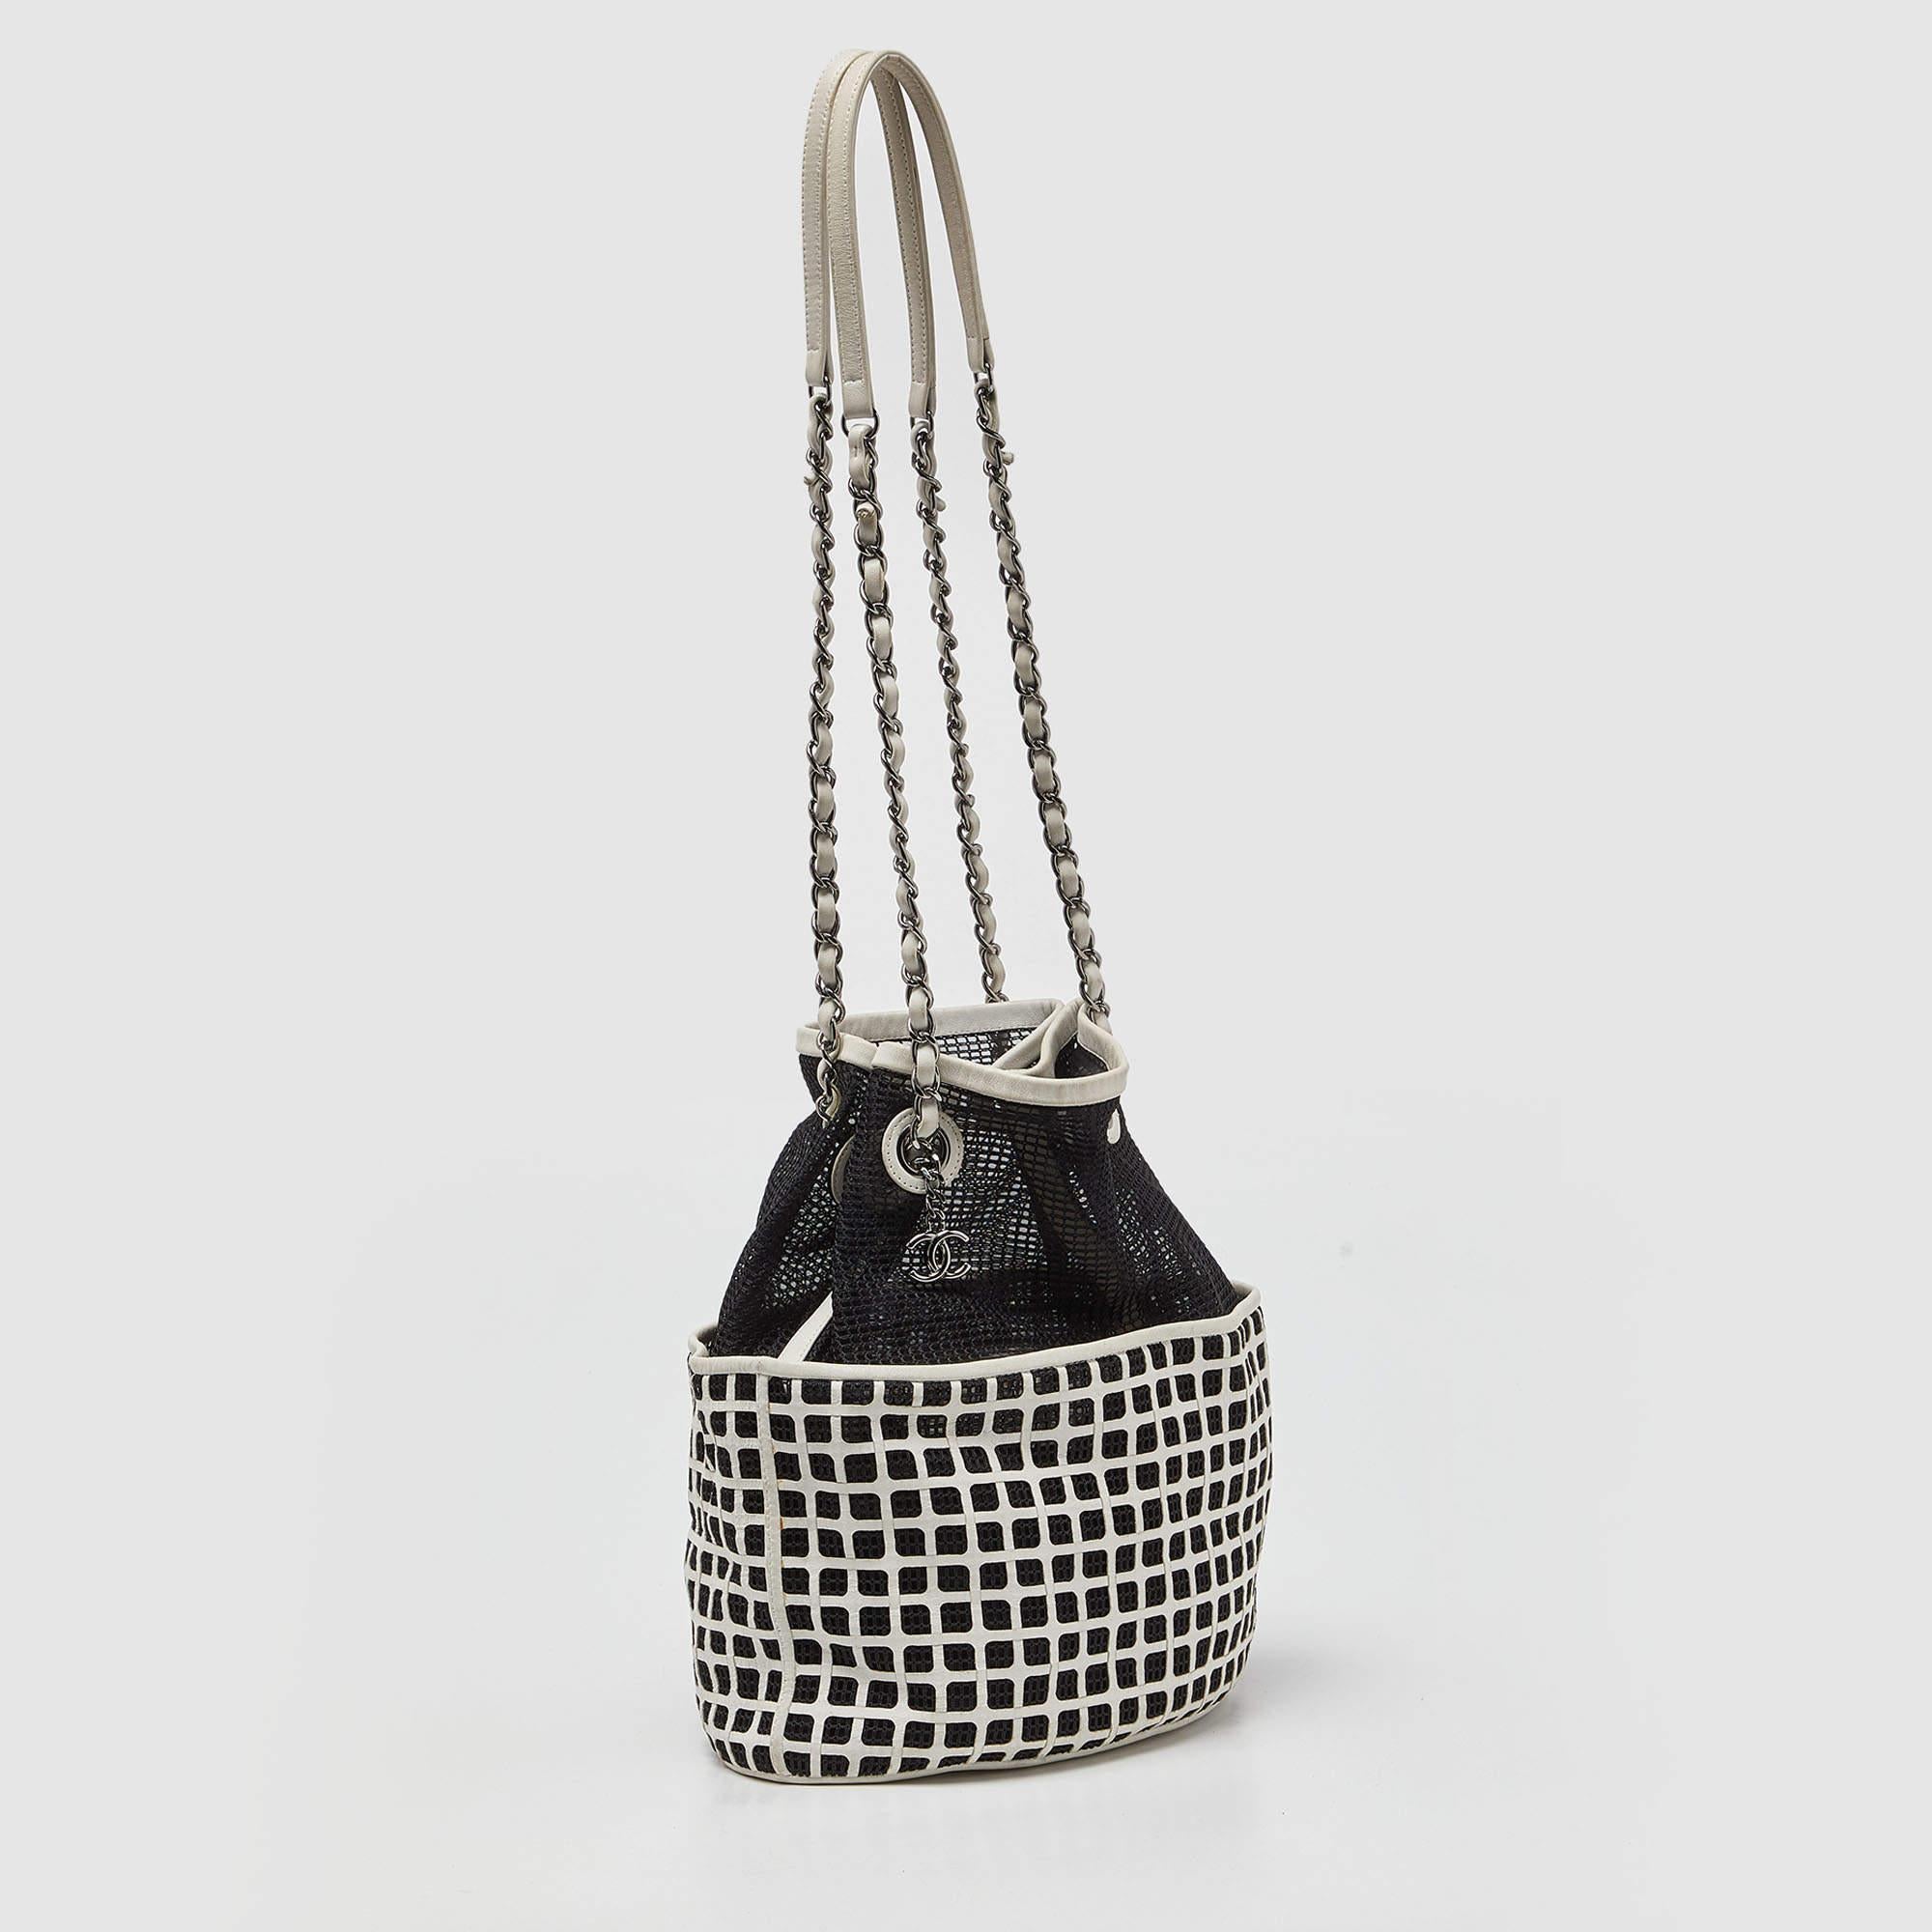 Chanel Black/White Mesh and Leather Bucket Bag For Sale 6